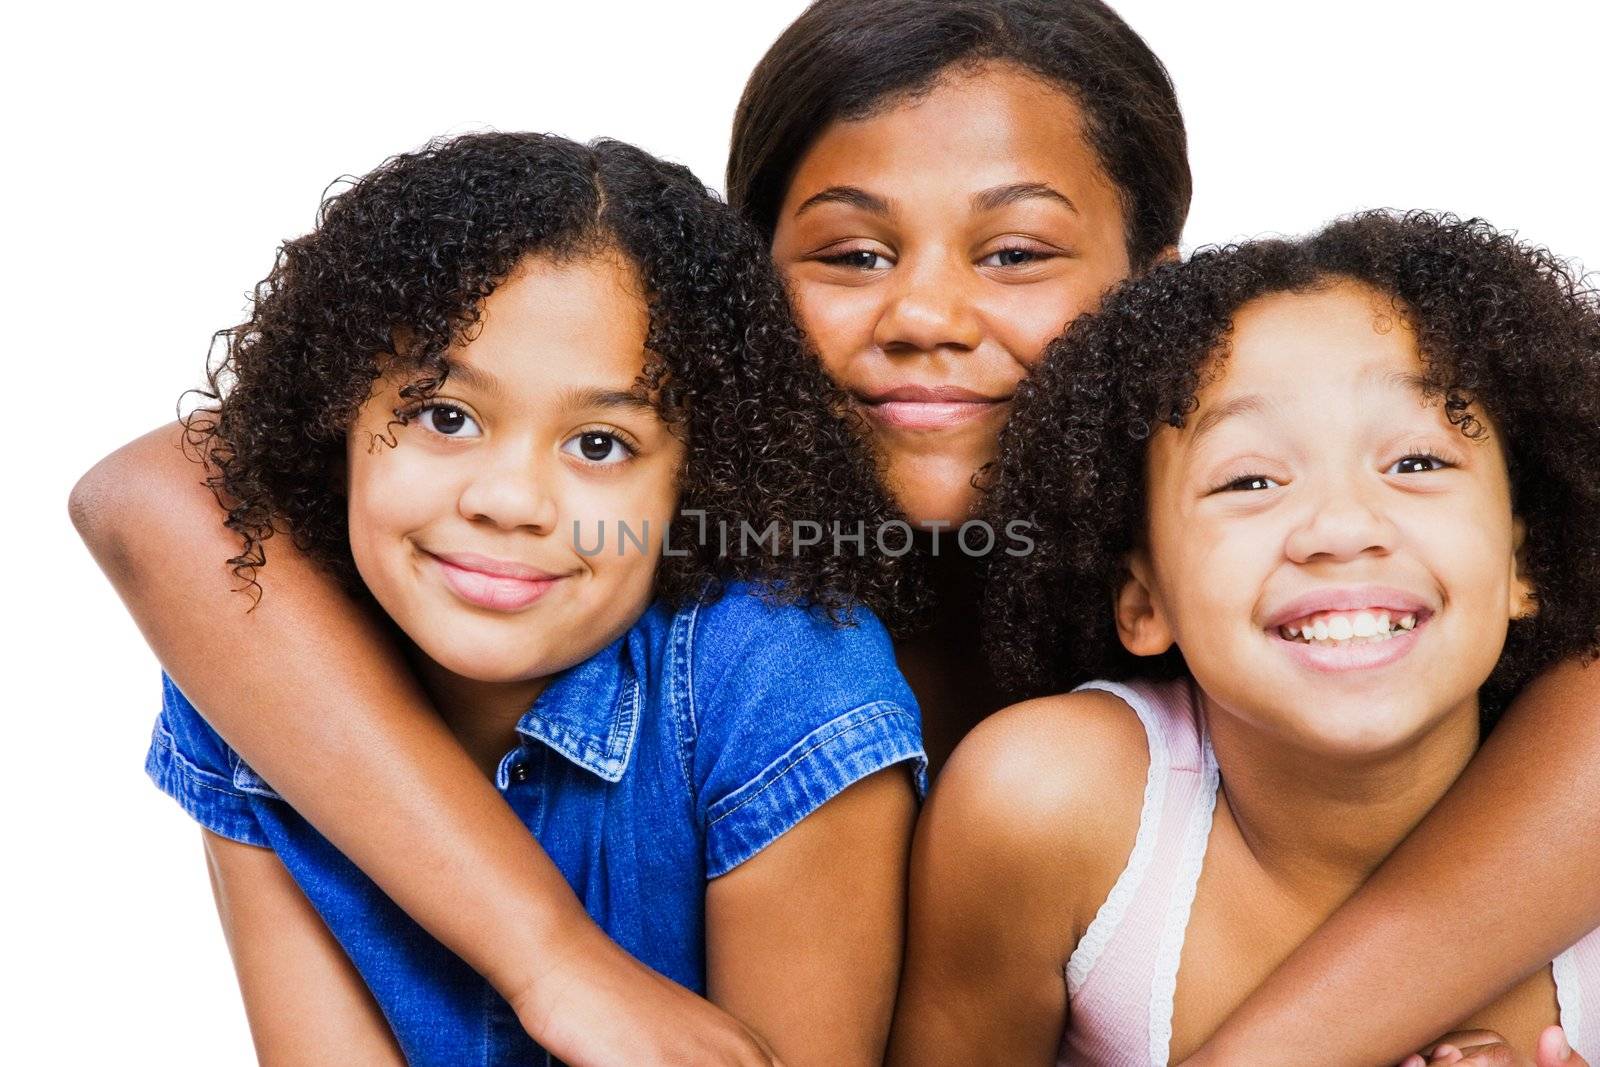 Teenage girl hugging her friends and smiling isolated over white